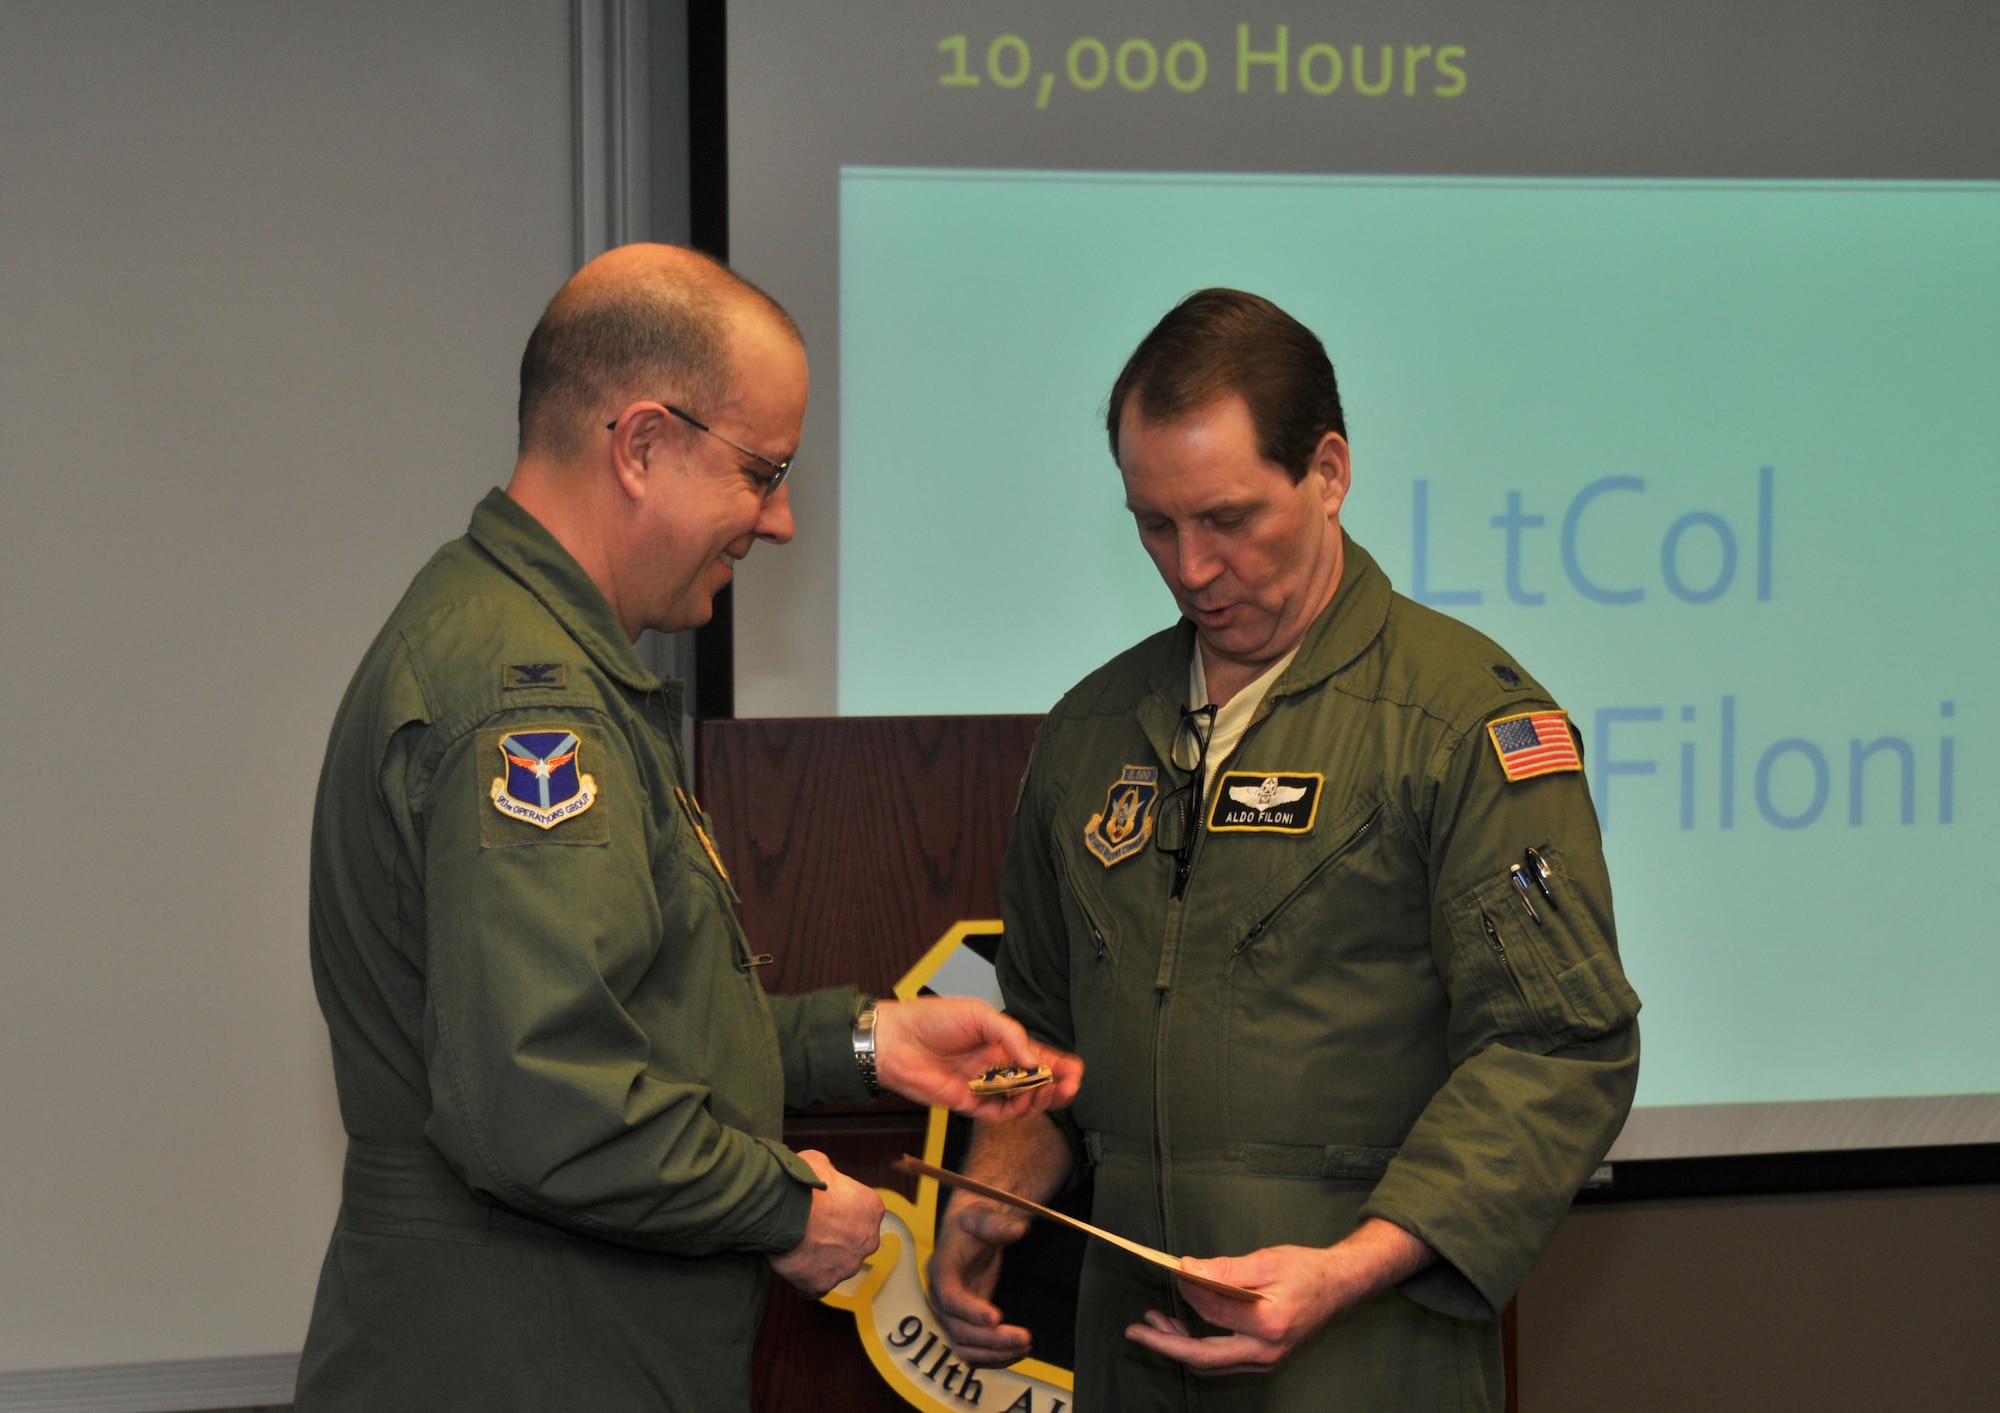 Lt. Col. Aldo Filoni, primary evaluator navigator with the 911th Operations Group, receives the Individual Mishap Free Flying Hour Award from 911th OG Commander Col. Joseph Potts during a group safety briefing here, March 8, 2015. Filoni flew 10,000 hours without a serious mishap and was recognized by wing safety for his achievements. (U.S. Air Force photo by Senior Airman Marjorie A. Bowlden)